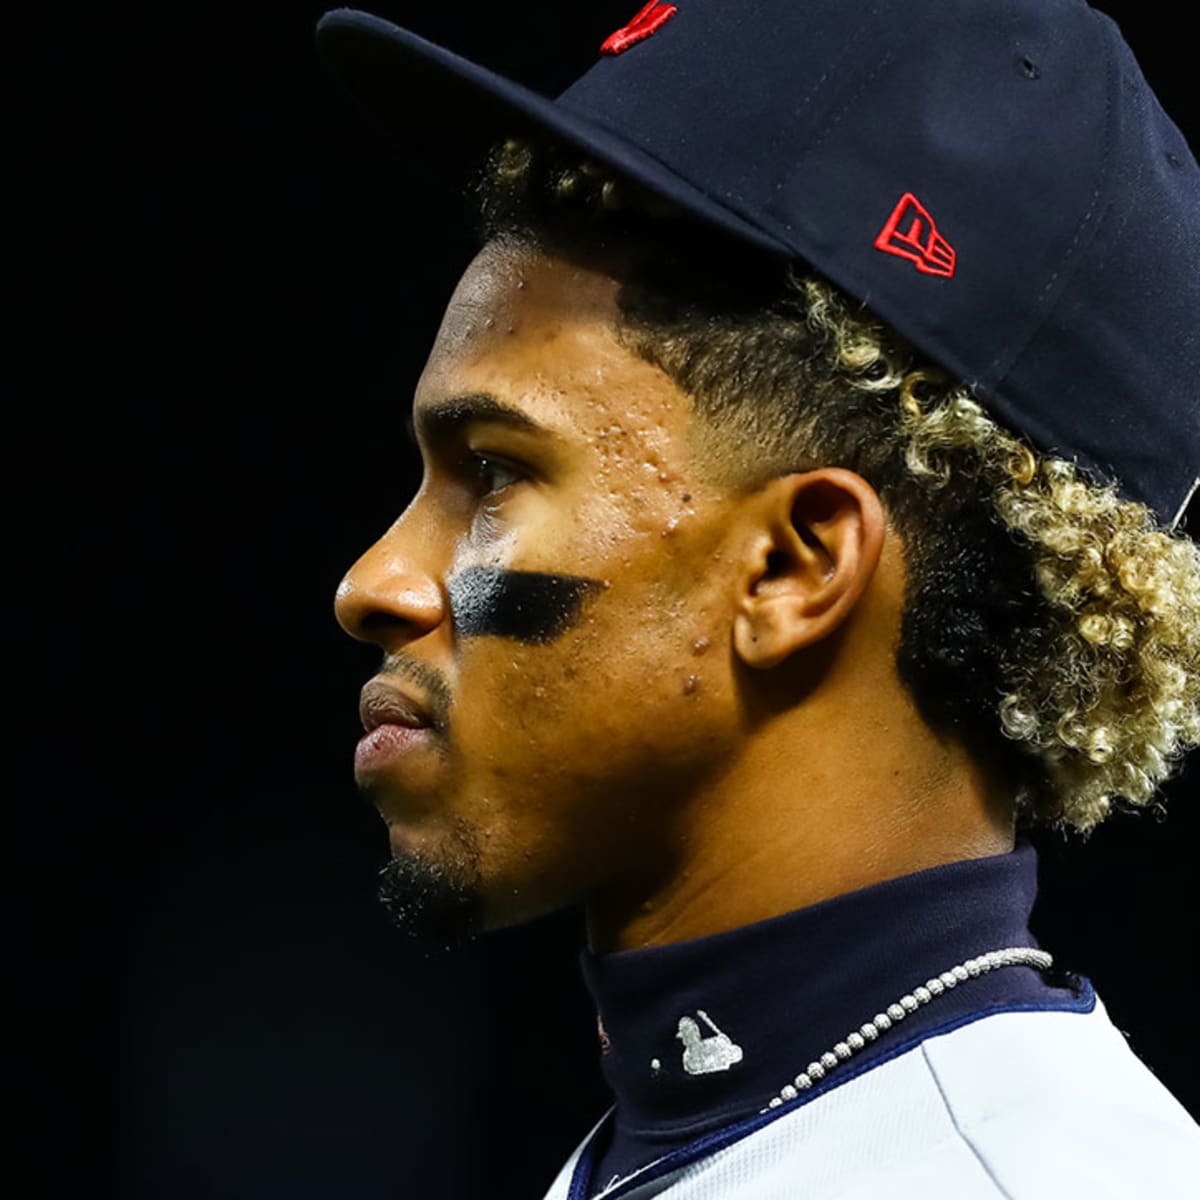 Tribe's Francisco Lindor is a marketing star, described as 'face of MLB